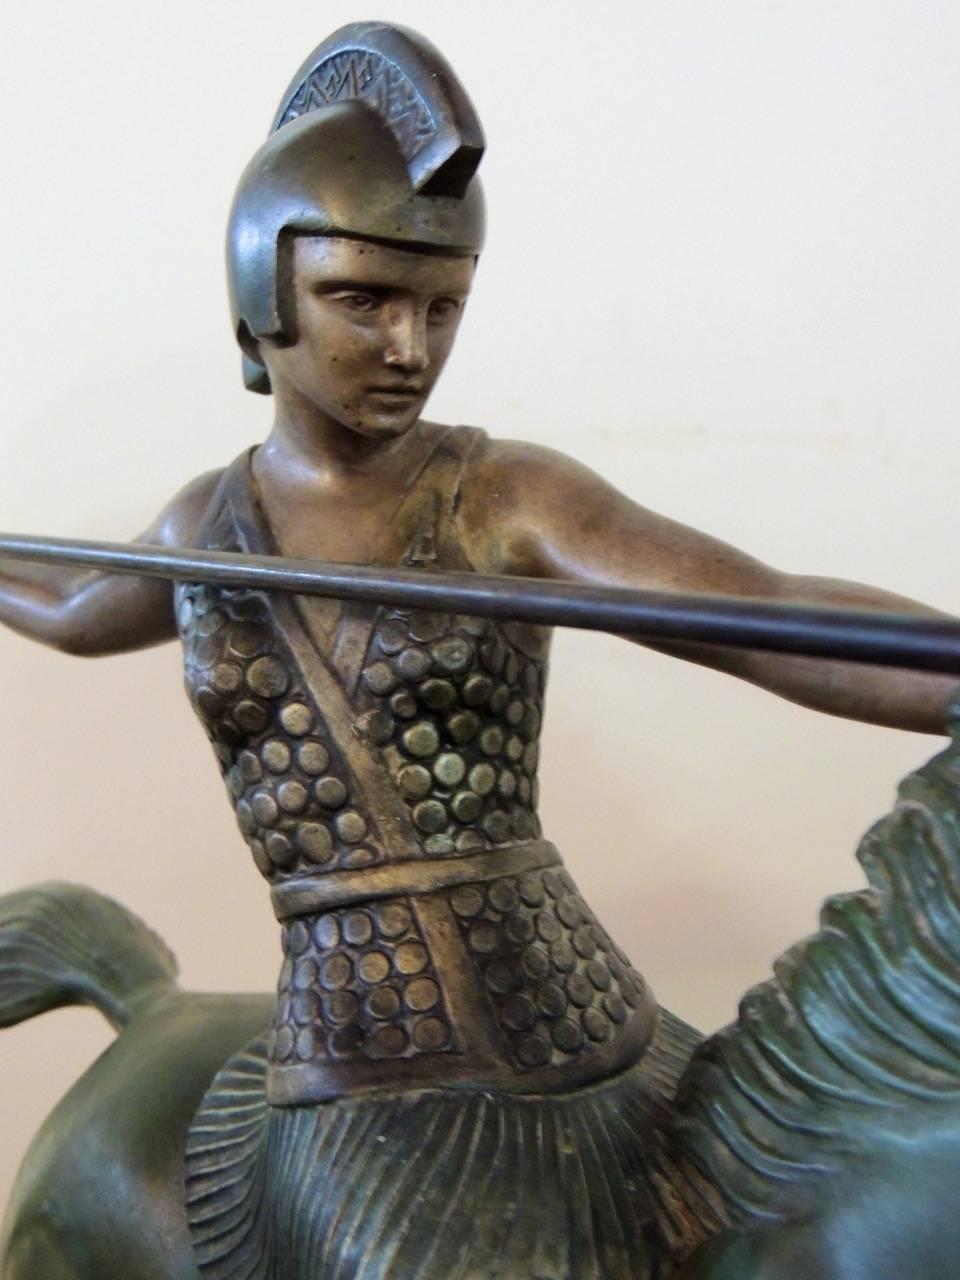 A beautifully executed Art Deco sculpture of a woman warrior in cold painted metal with a rich patina green base and touches of gilding. The piece is signed by Melo, a sculptor known for equestrian themes in his art and statues of the